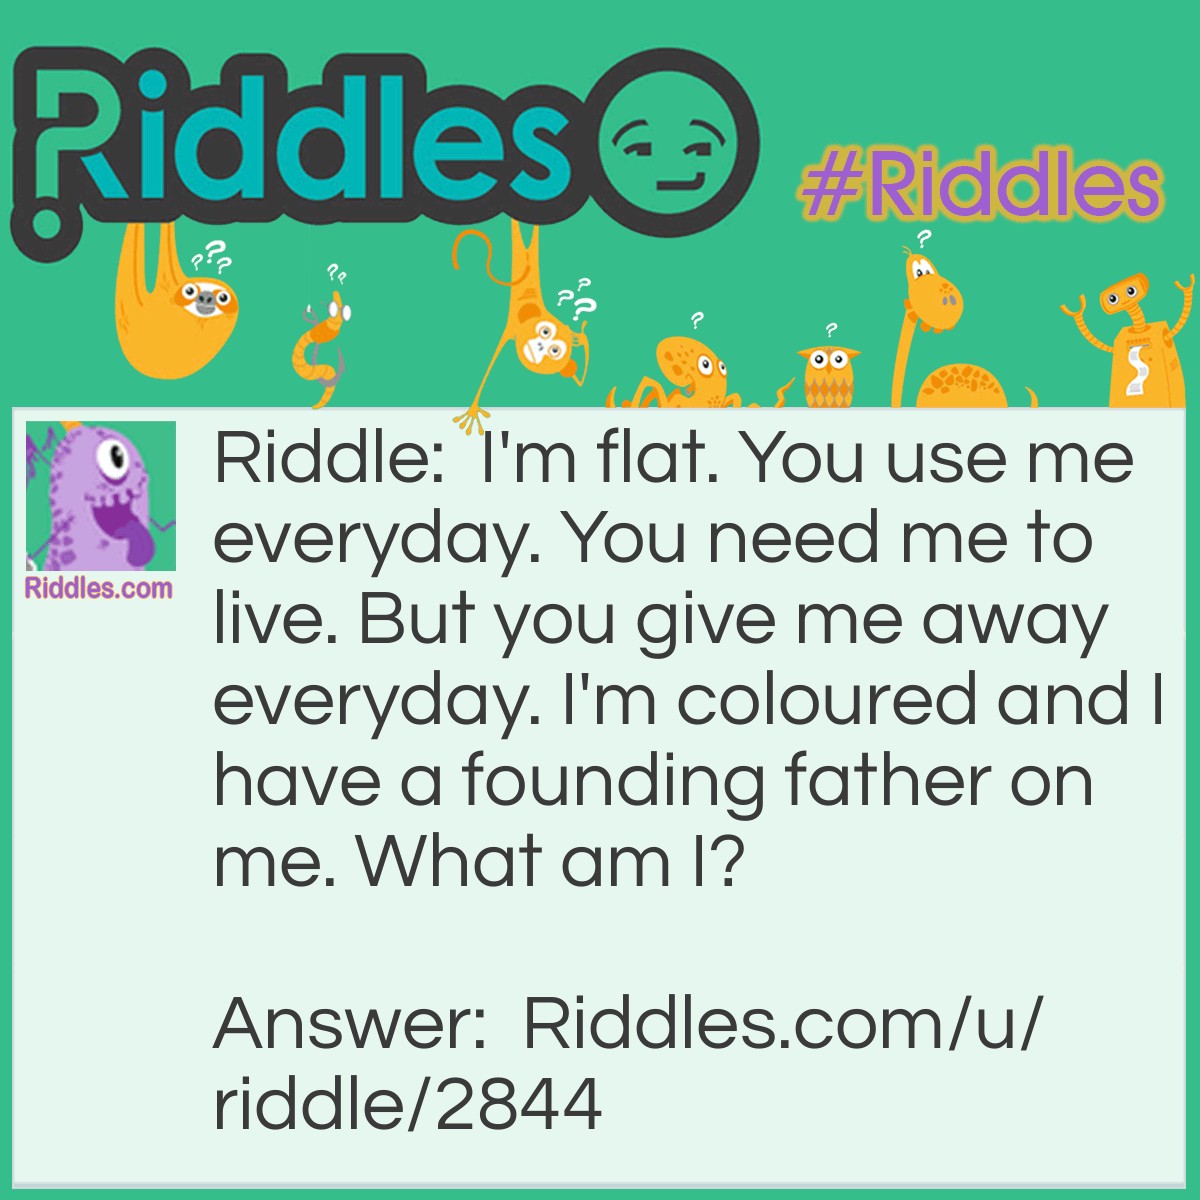 Riddle: I'm flat. You use me everyday. You need me to live. But you give me away everyday. I'm coloured and I have a founding father on me. What am I? Answer: A bill.